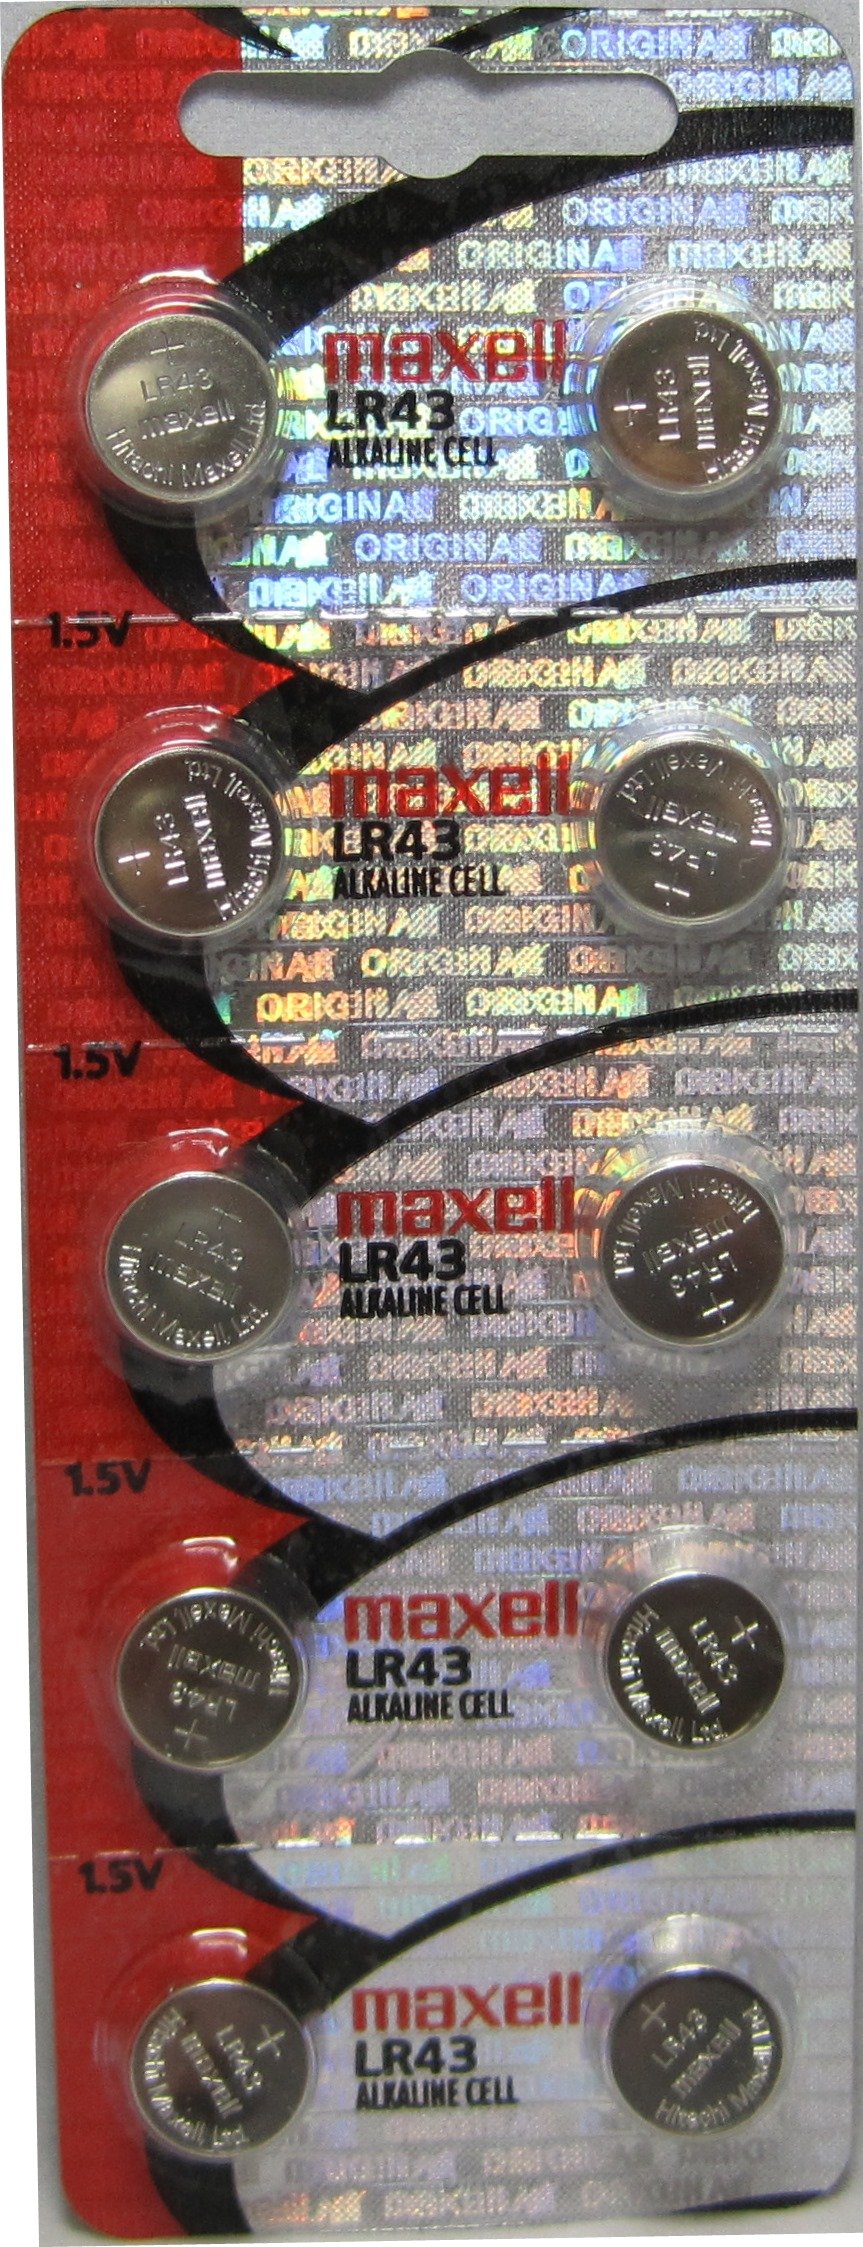 10 Maxell Lr43 AG12 386 Alkaline Batteries, New Hologram Packaging That Guarantees Authenticity